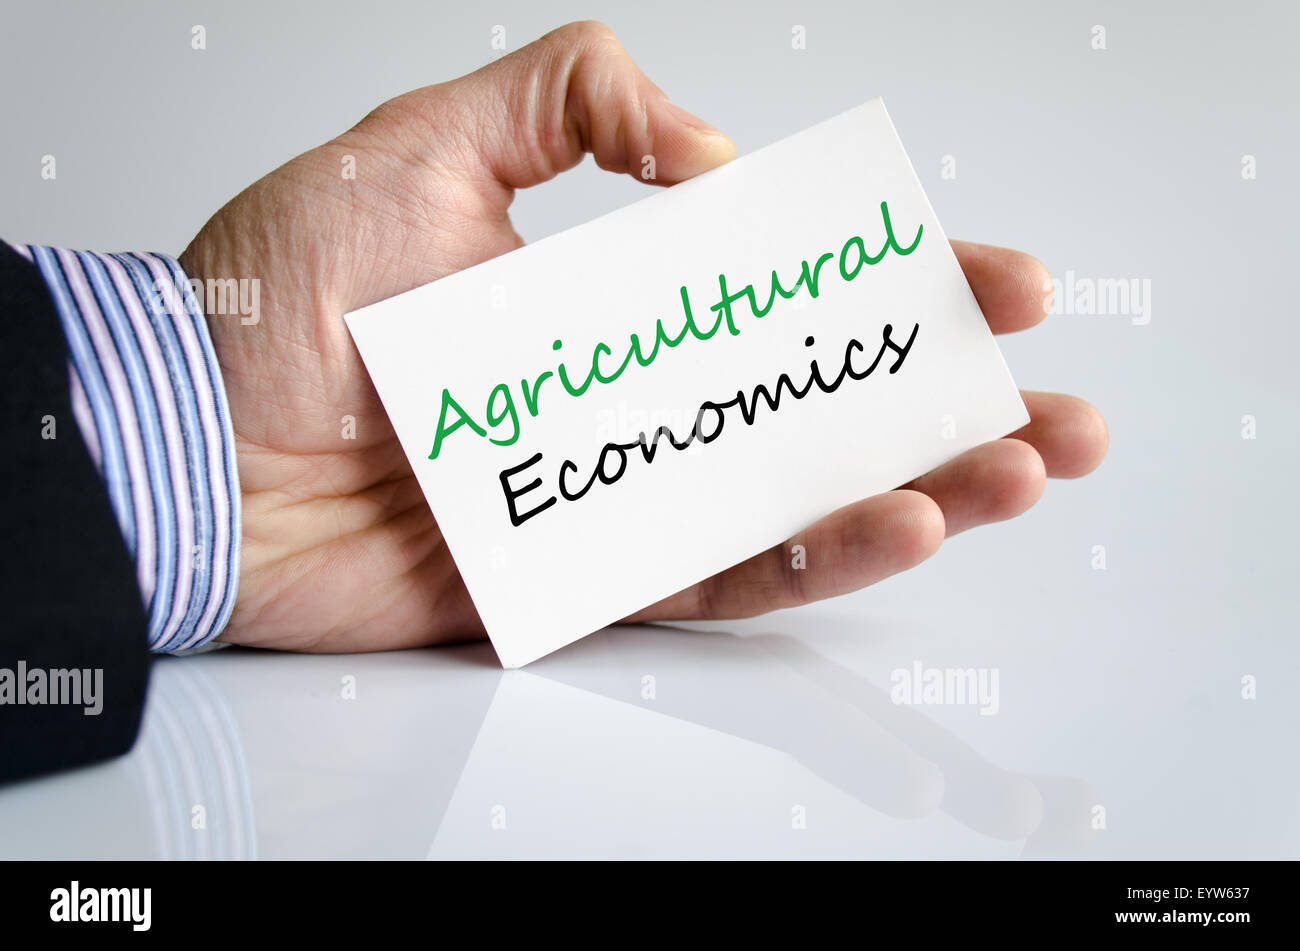 Agricultural economics text concept isolated over white background Stock Photo